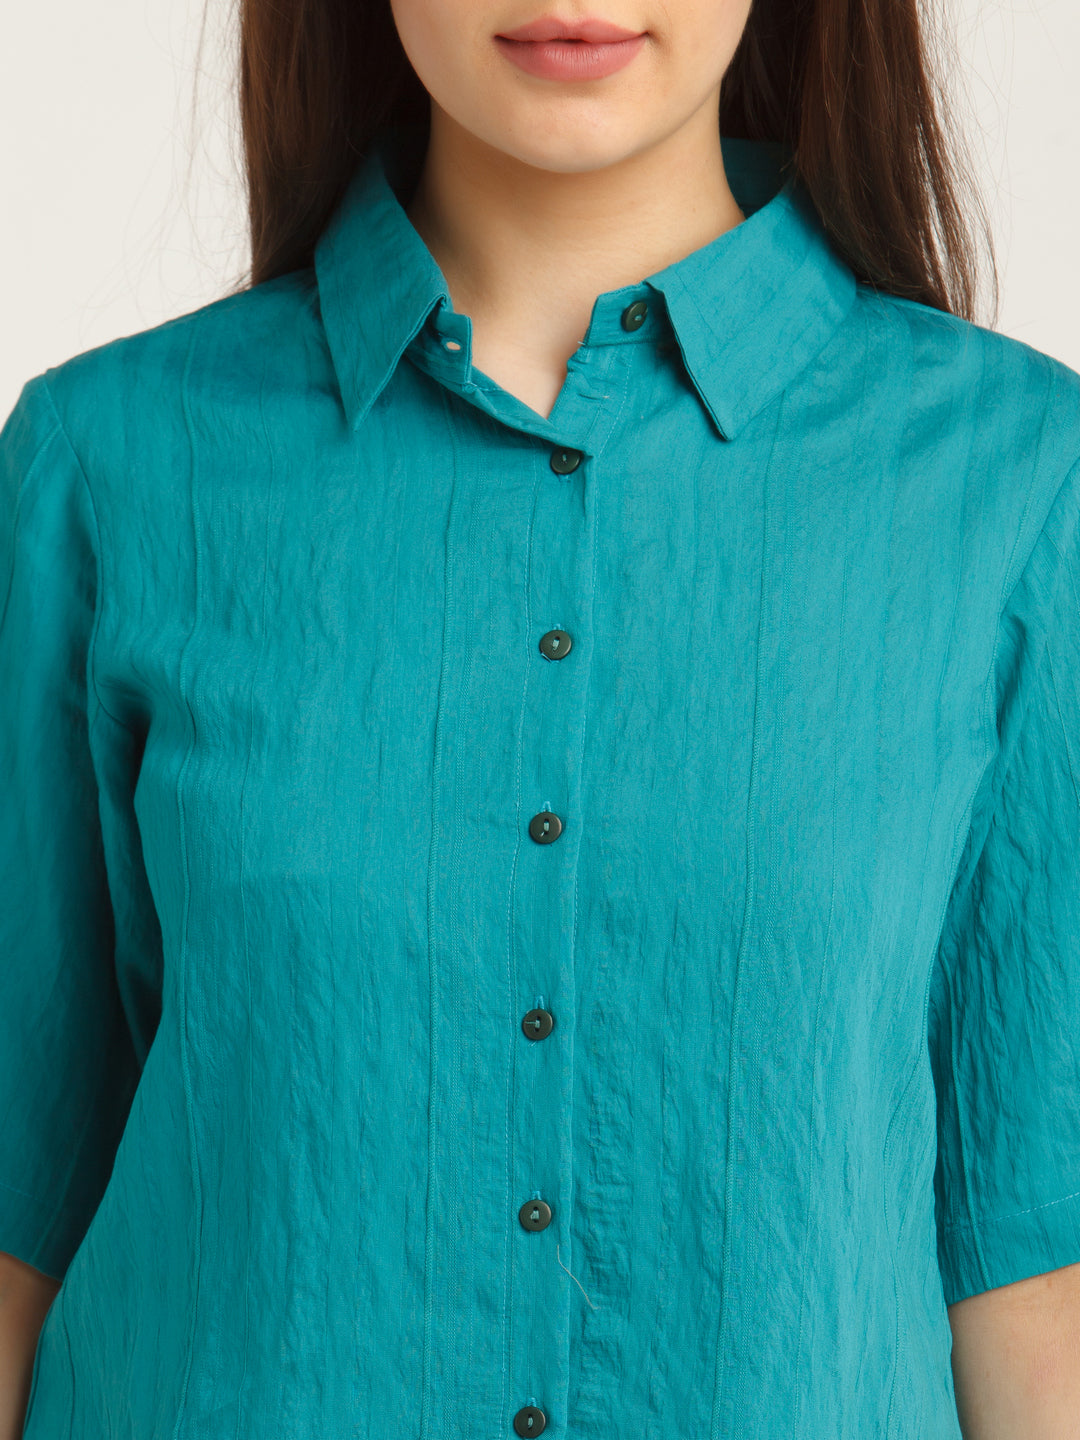 Teal-Solid-Shirt-for-Women-VT02958_118-Teal-6